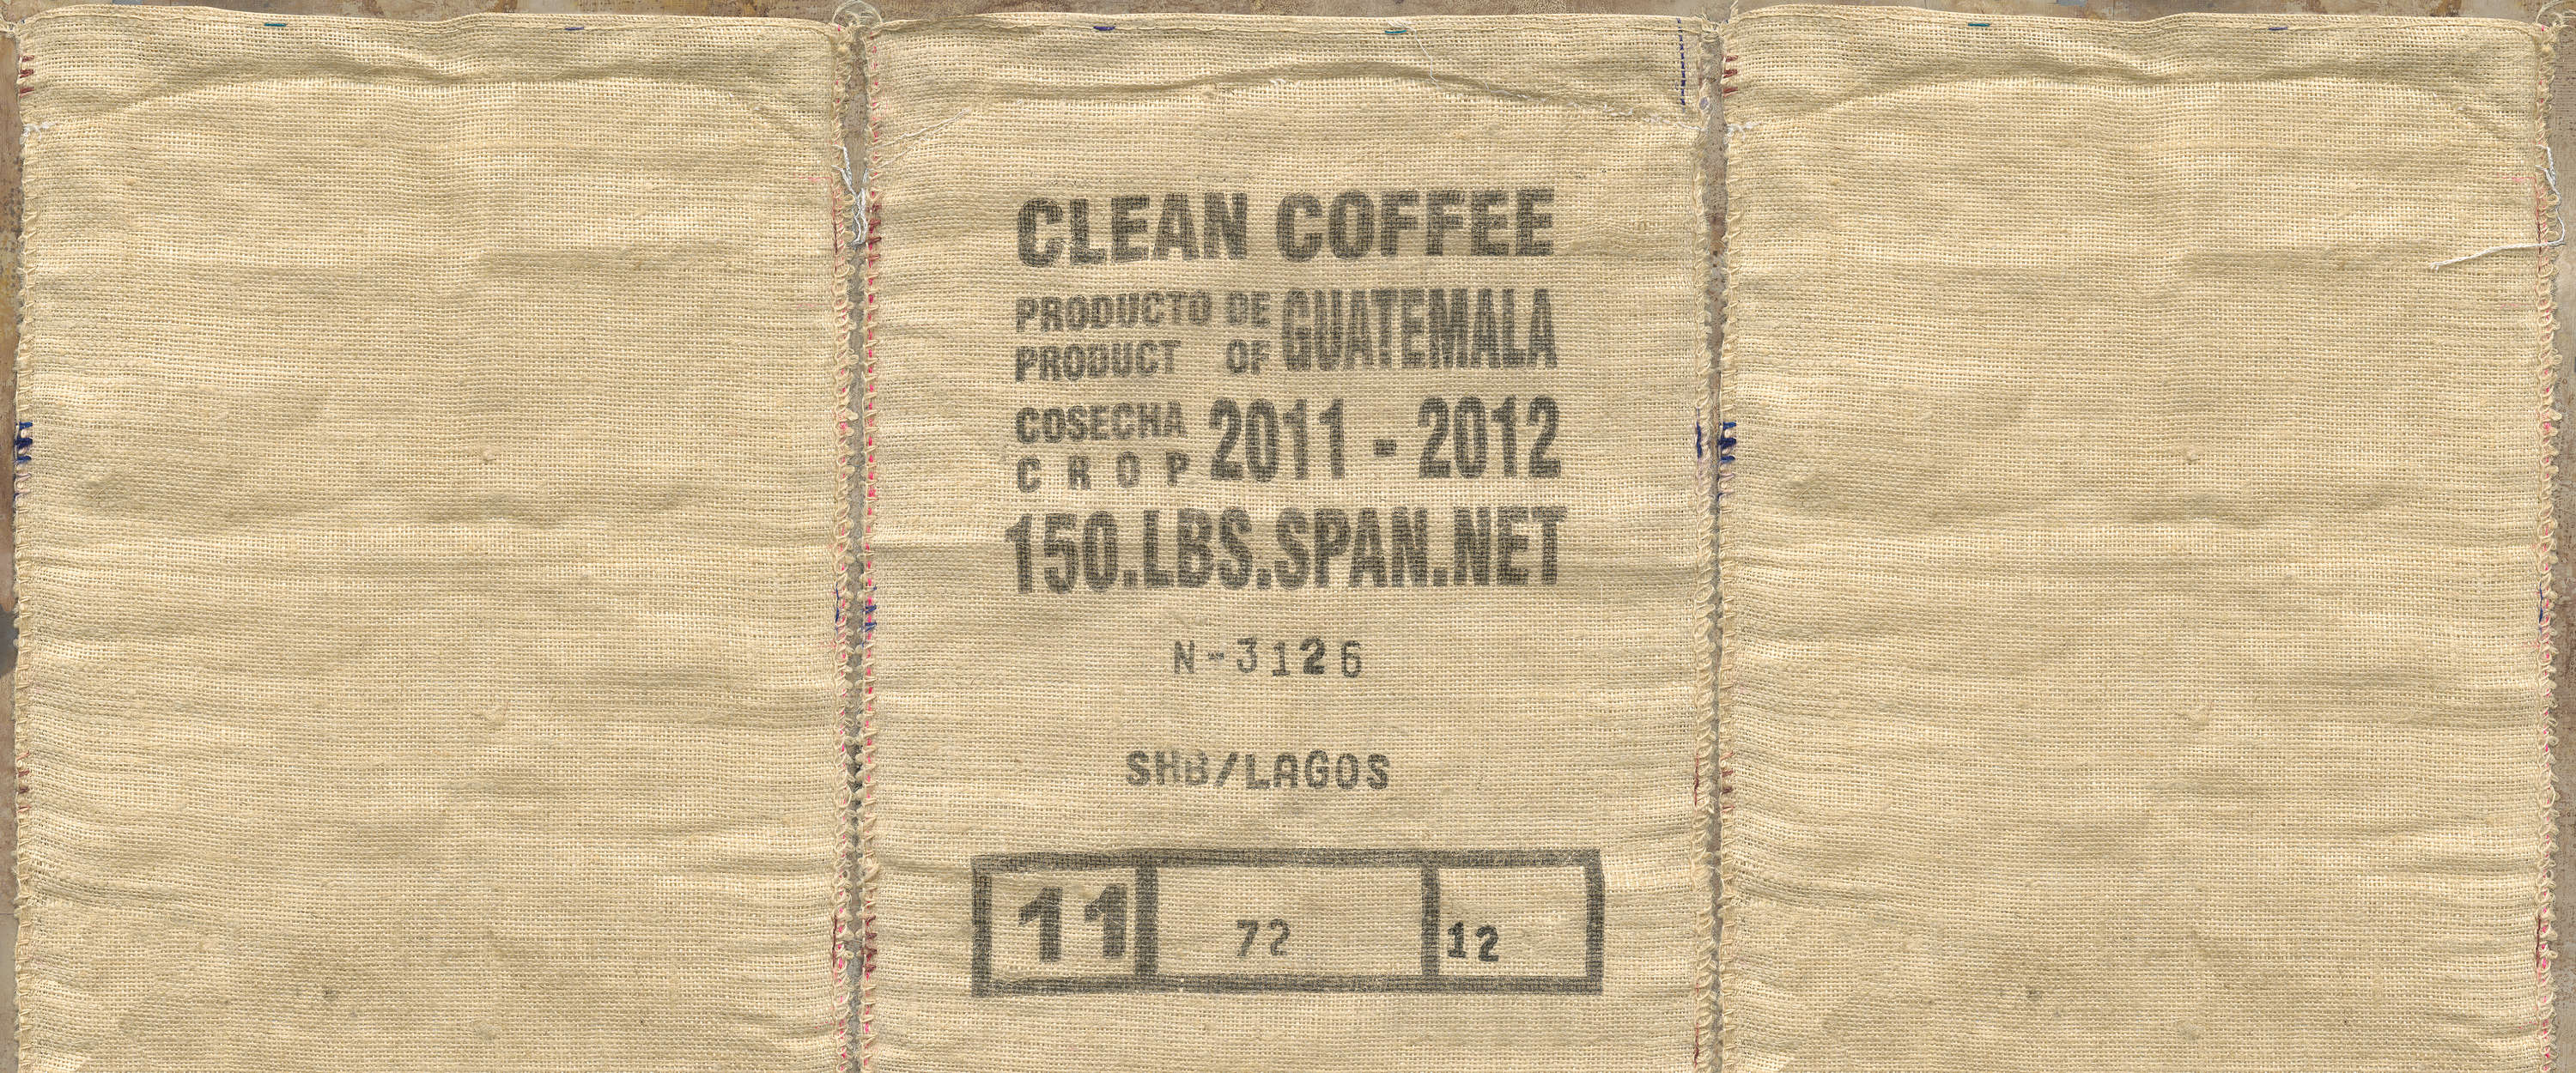             Photo wallpaper with detail of a coffee bag
        